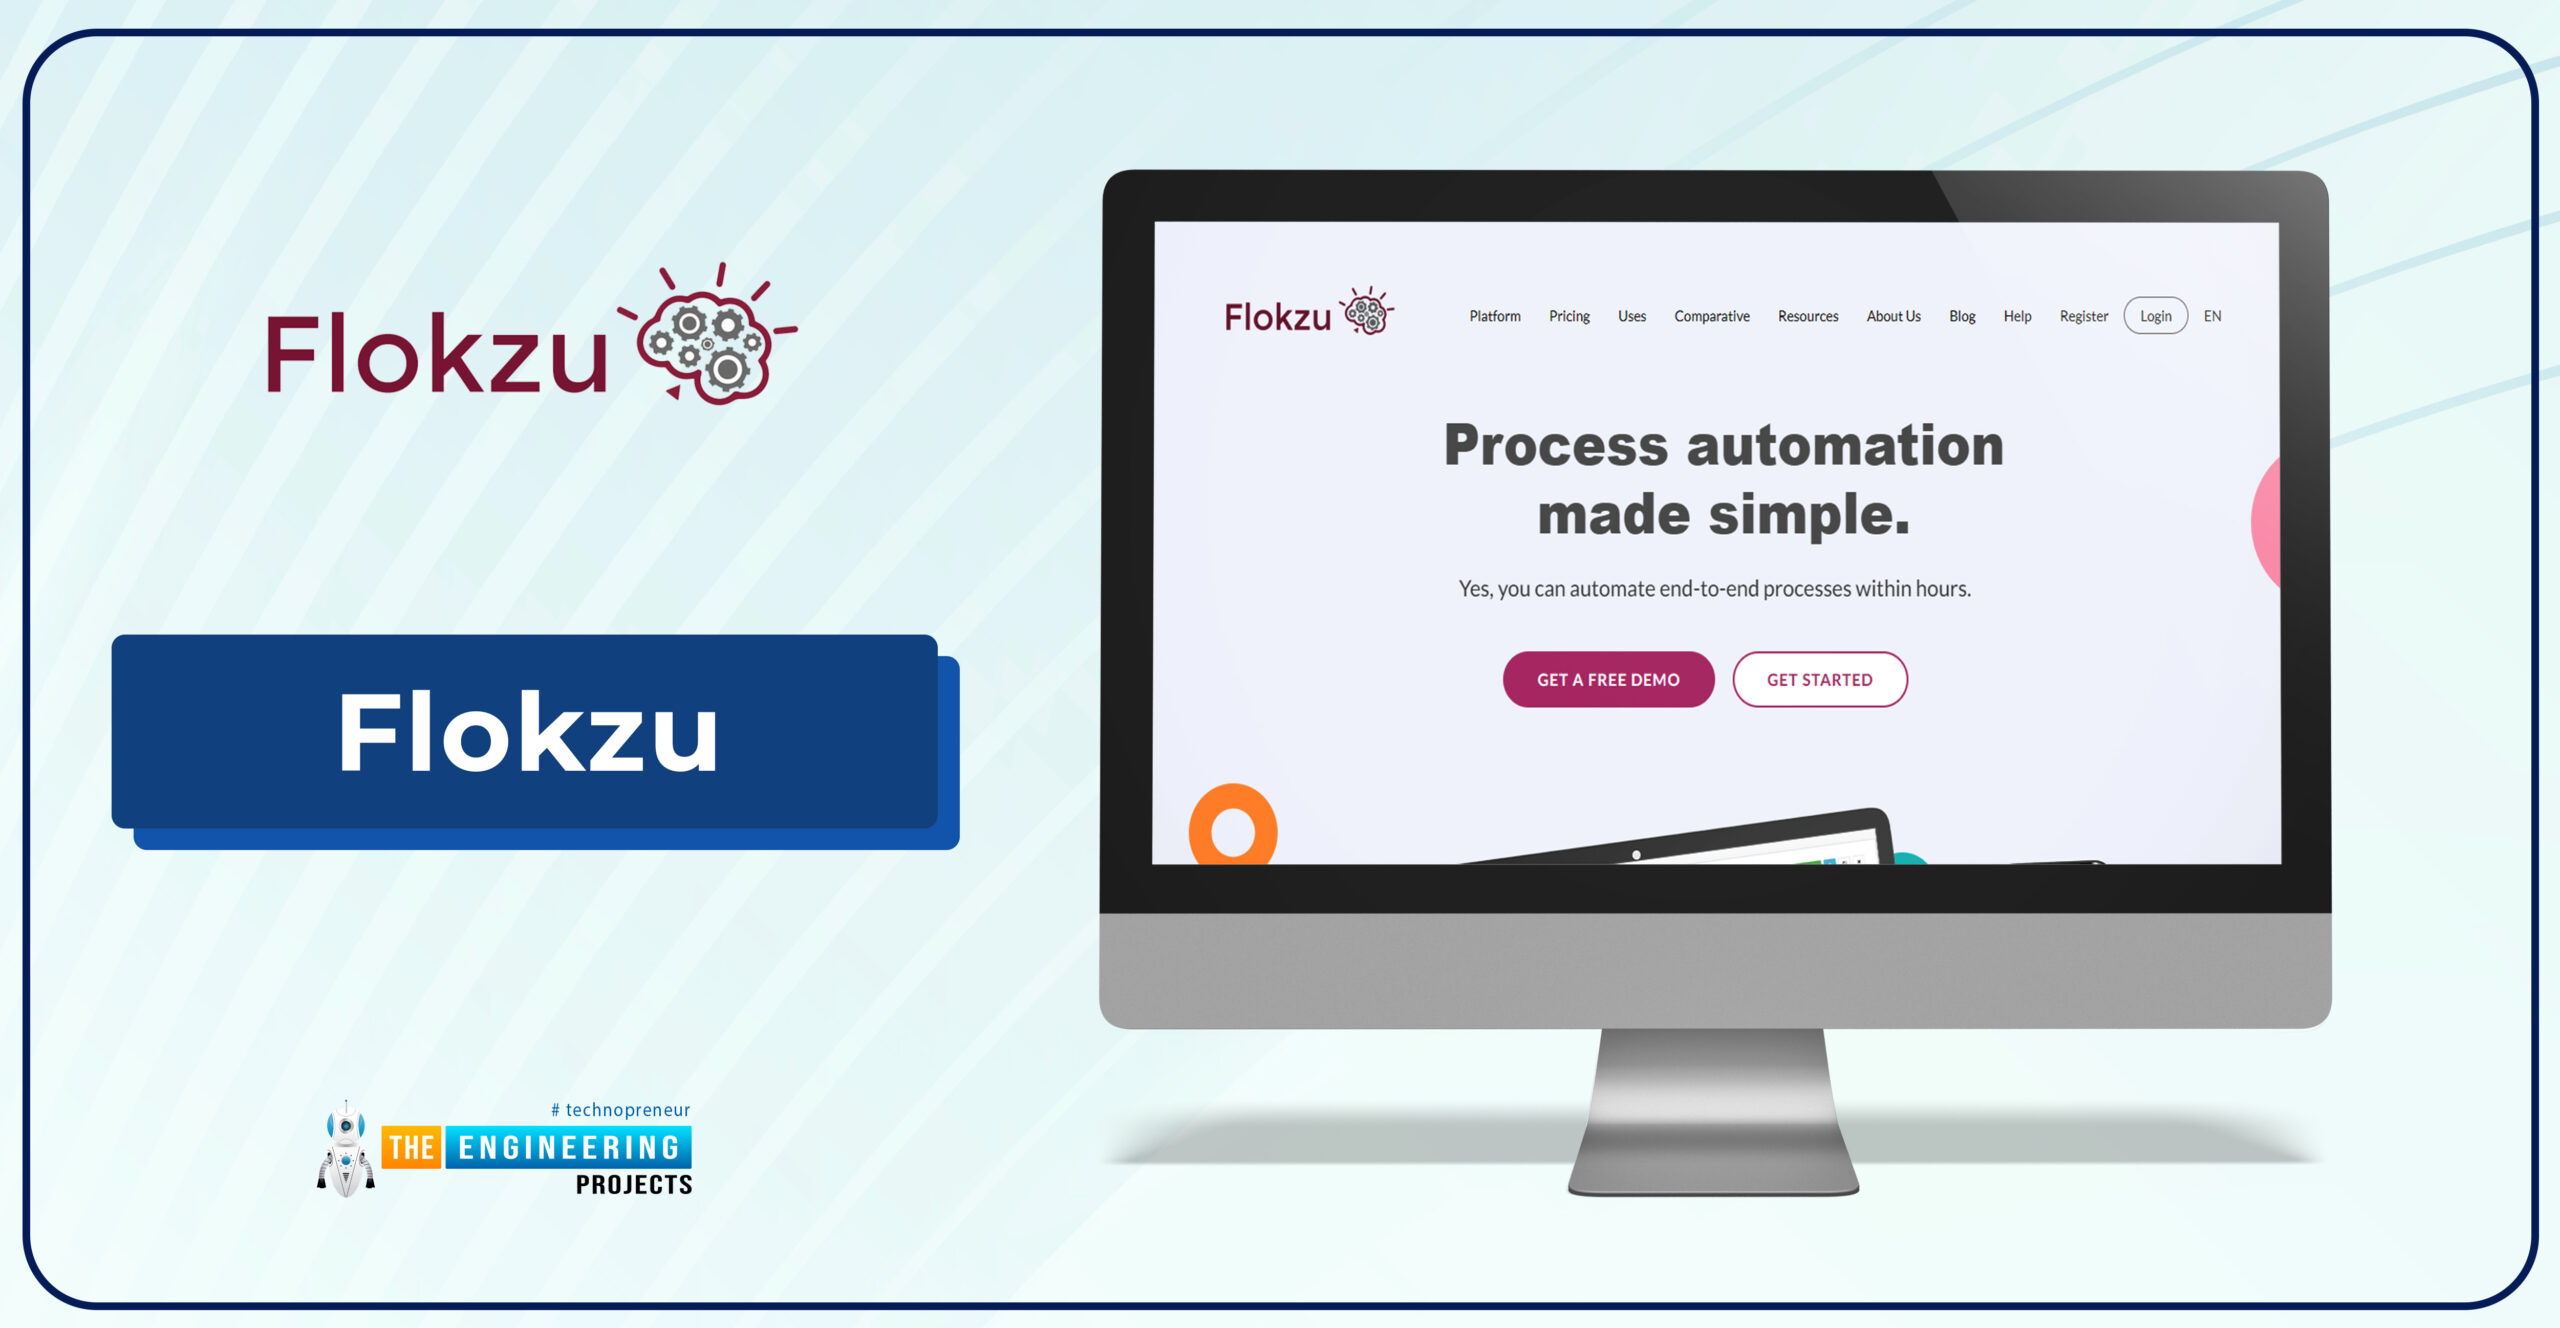 Top 10 Workflow Automation Software, workflow automation software list, top workflow automation software, best workflow automation software